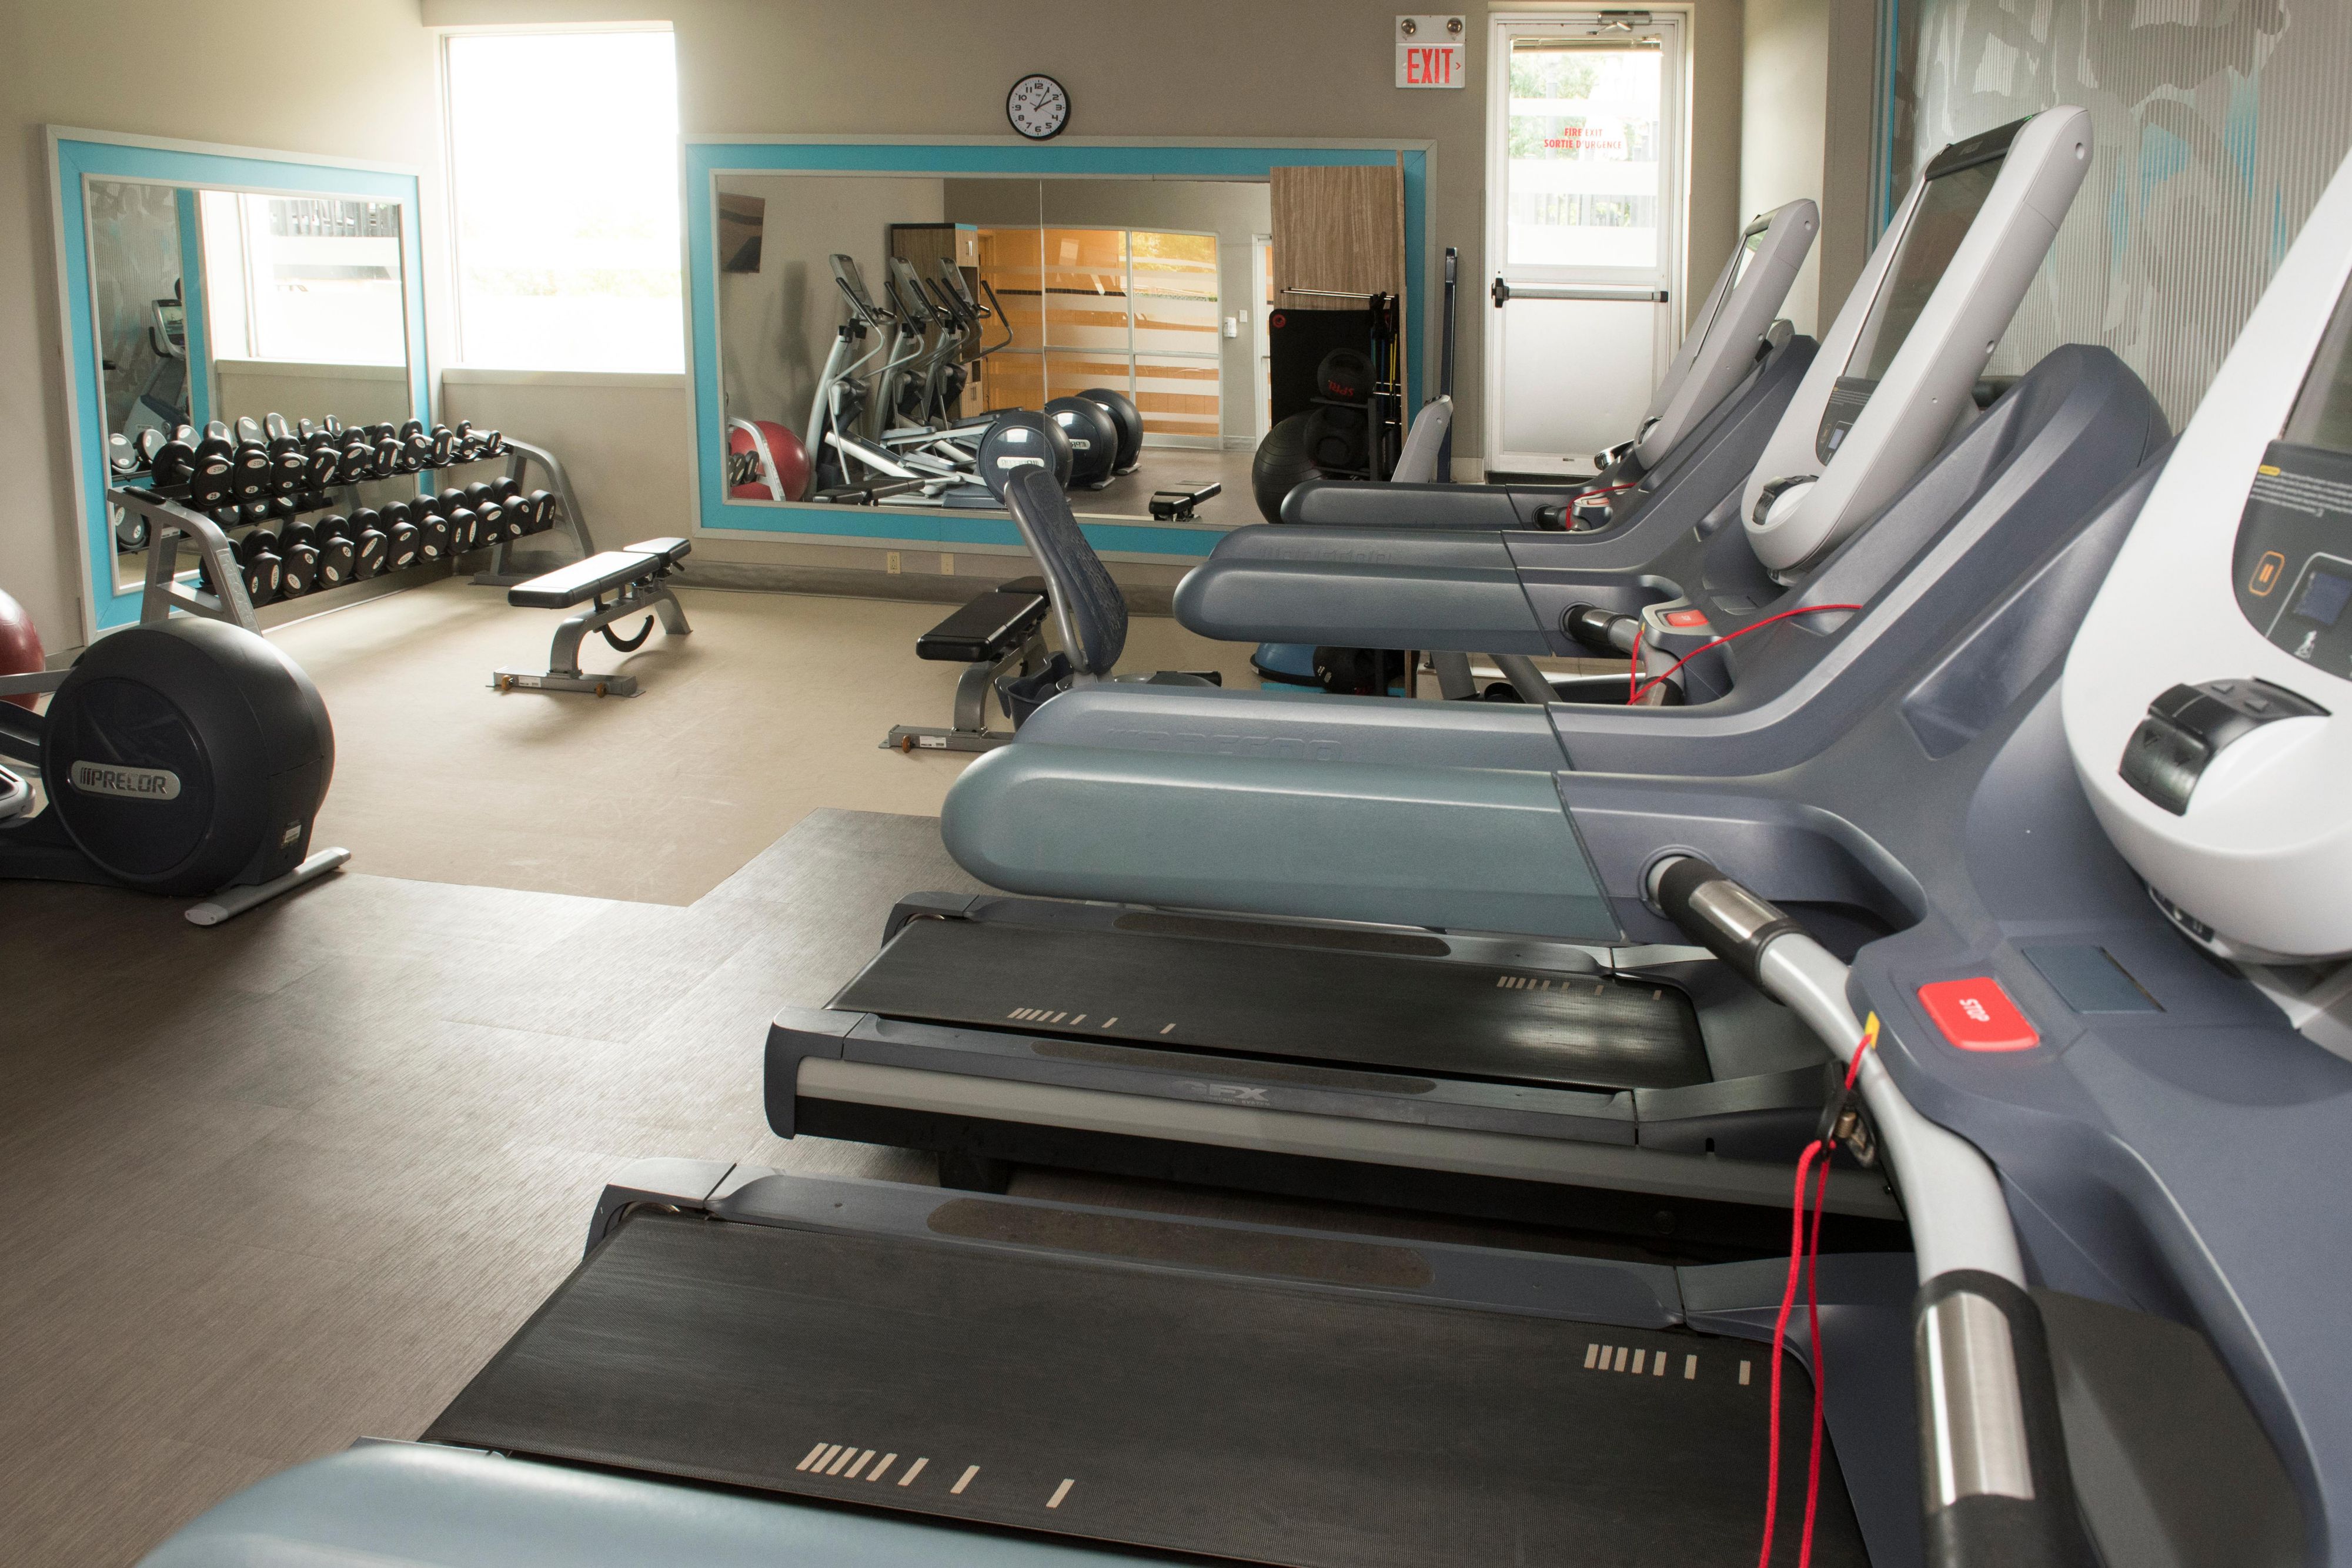 Continue your workout regimen at our fitness center